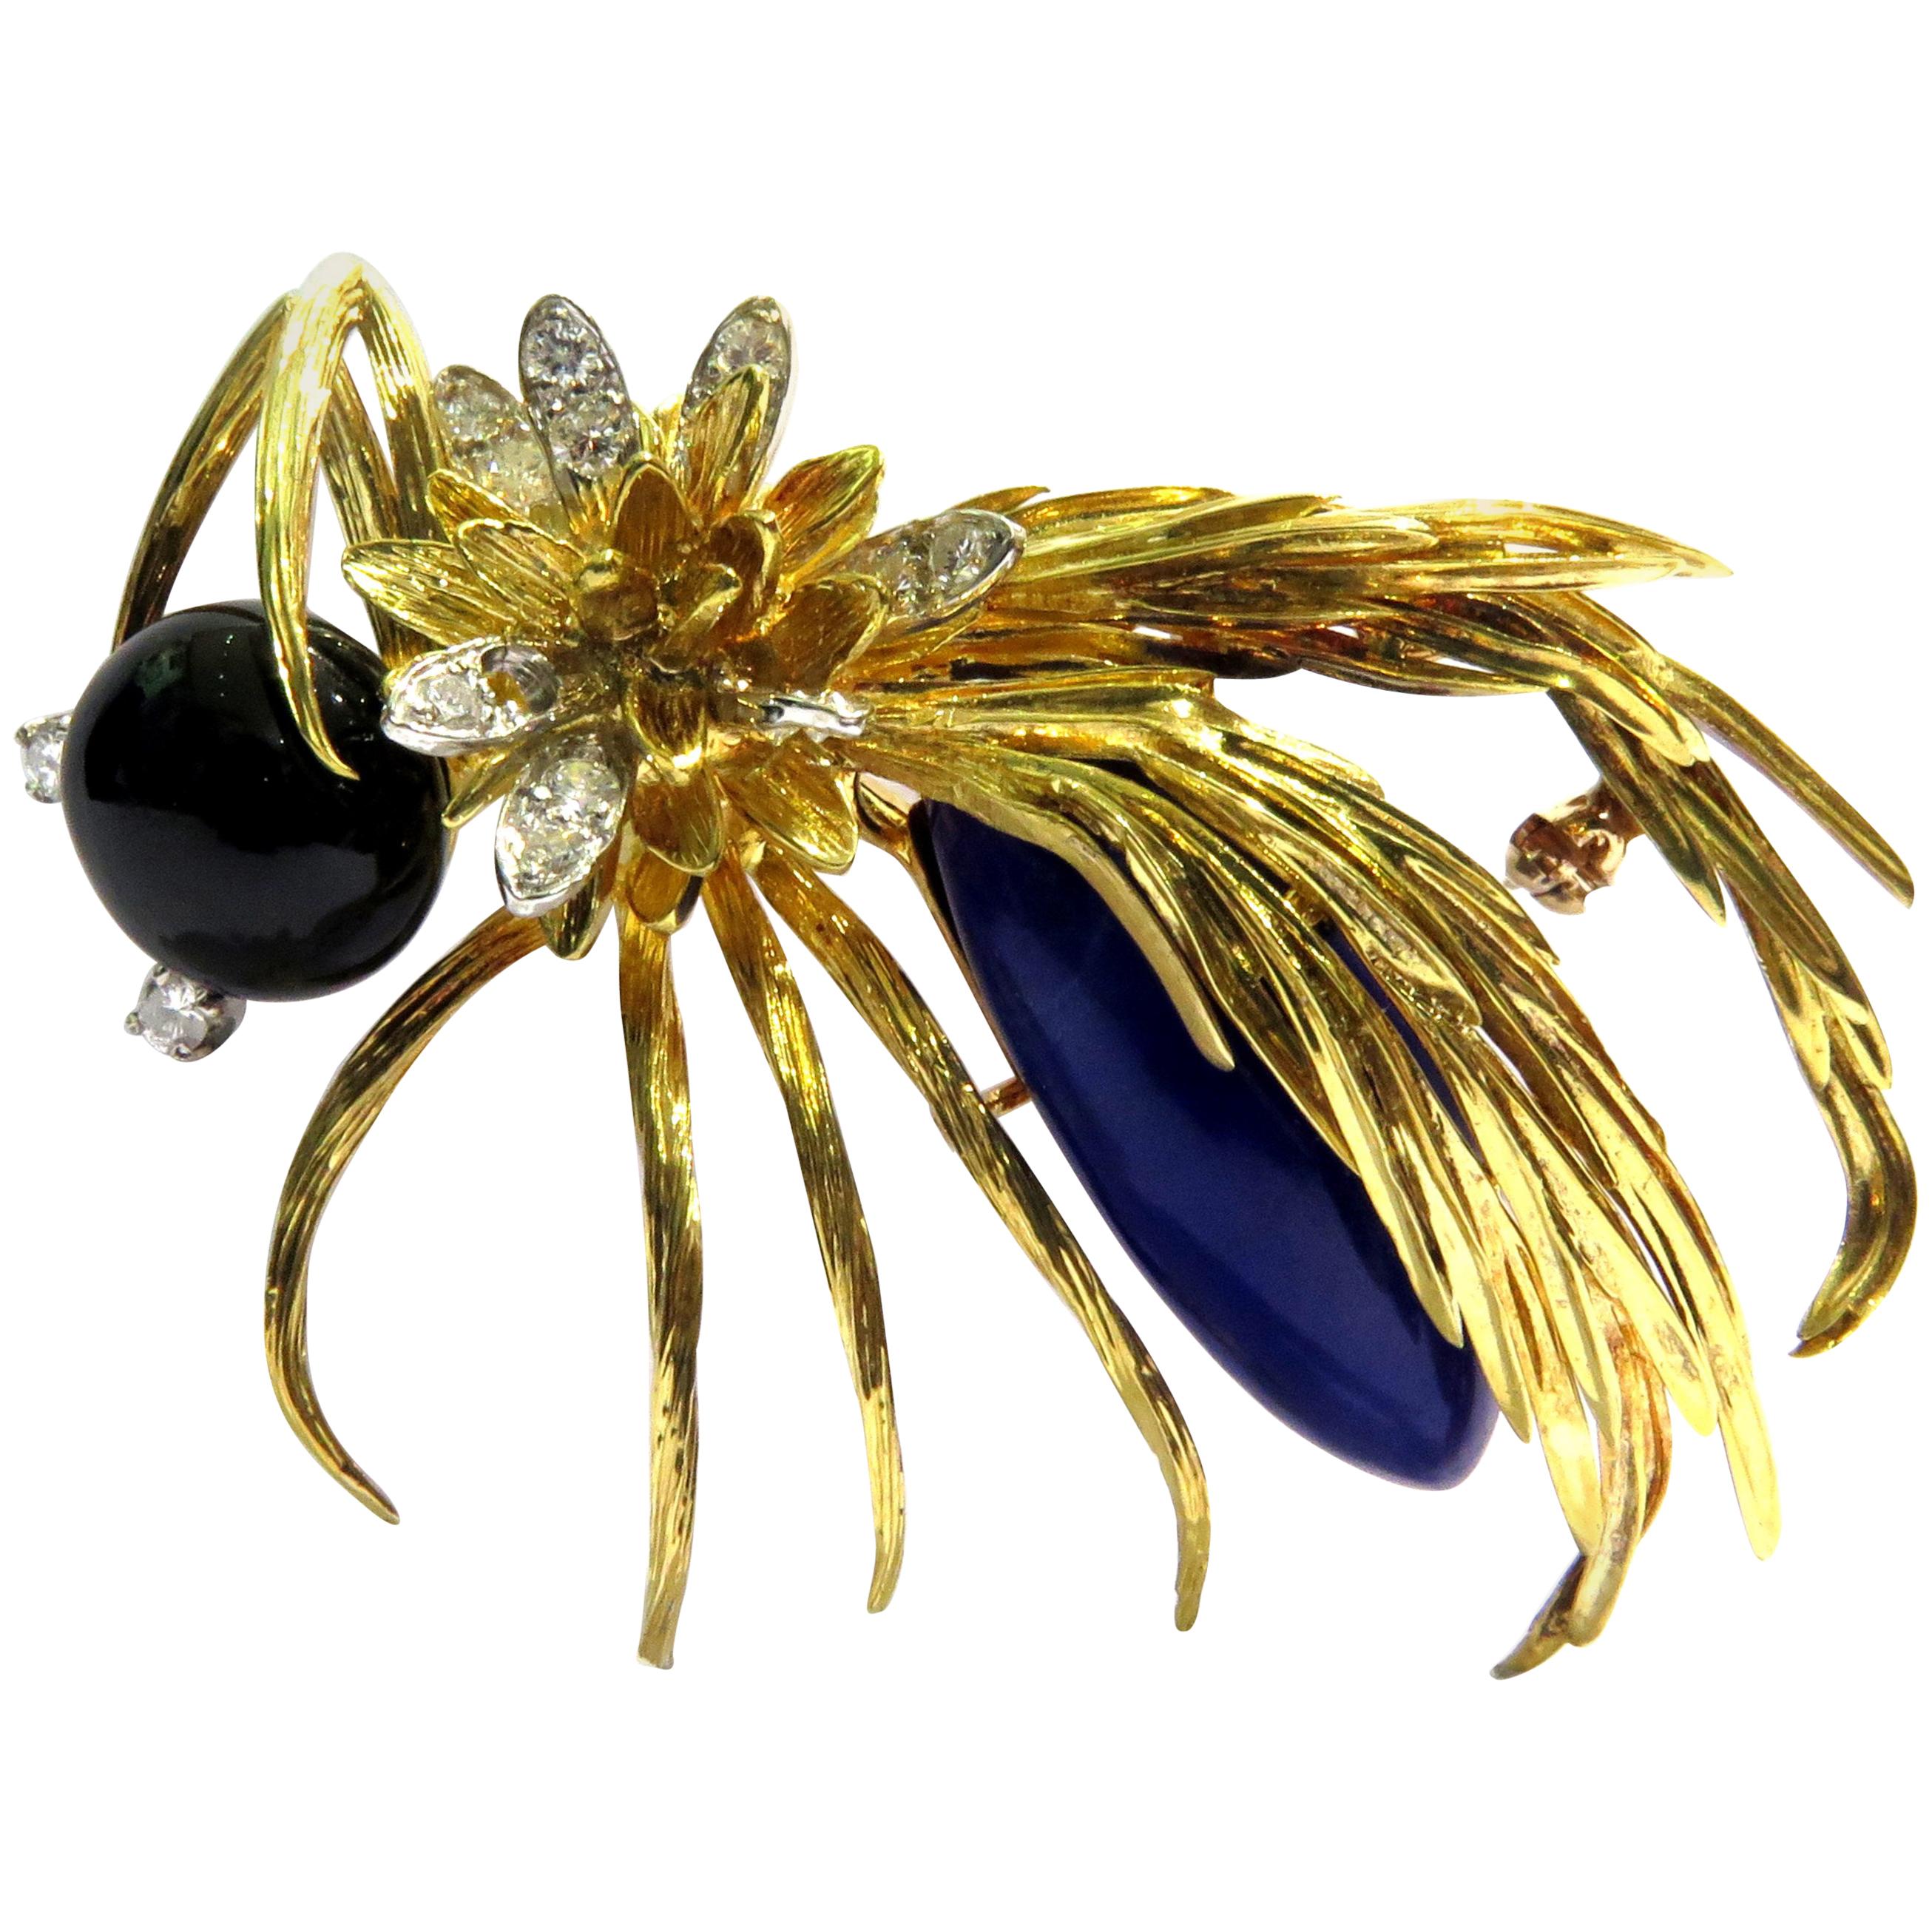 Huge Hammerman Brothers Platinum Gold Wasp Pin Brooch With Diamonds Lapis & Onyx For Sale